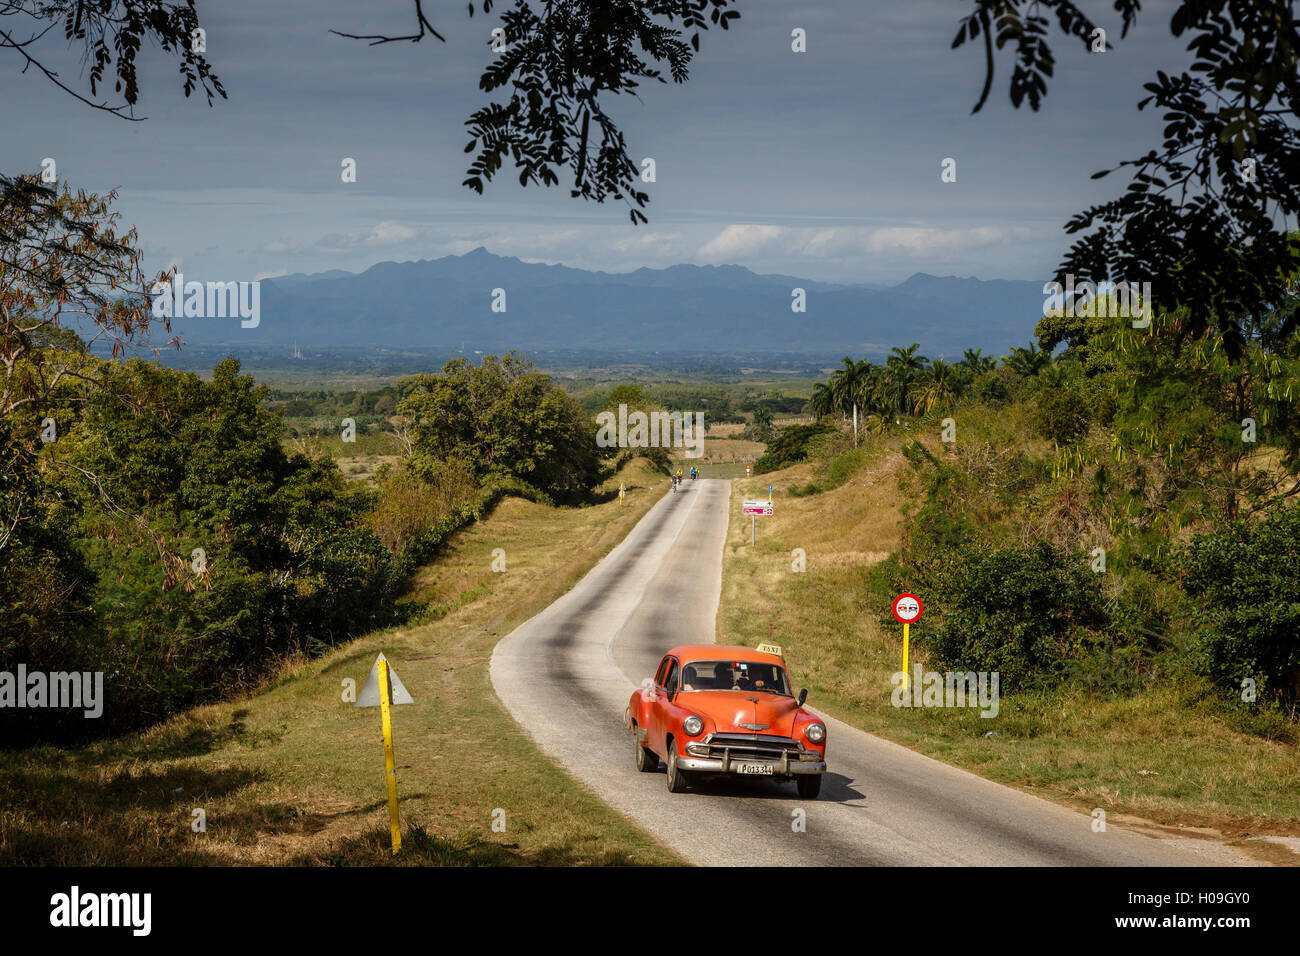 Old vintage American car on a road outside Trinidad, Sancti Spiritus Province, Cuba, West Indies, Caribbean, Central America Stock Photo